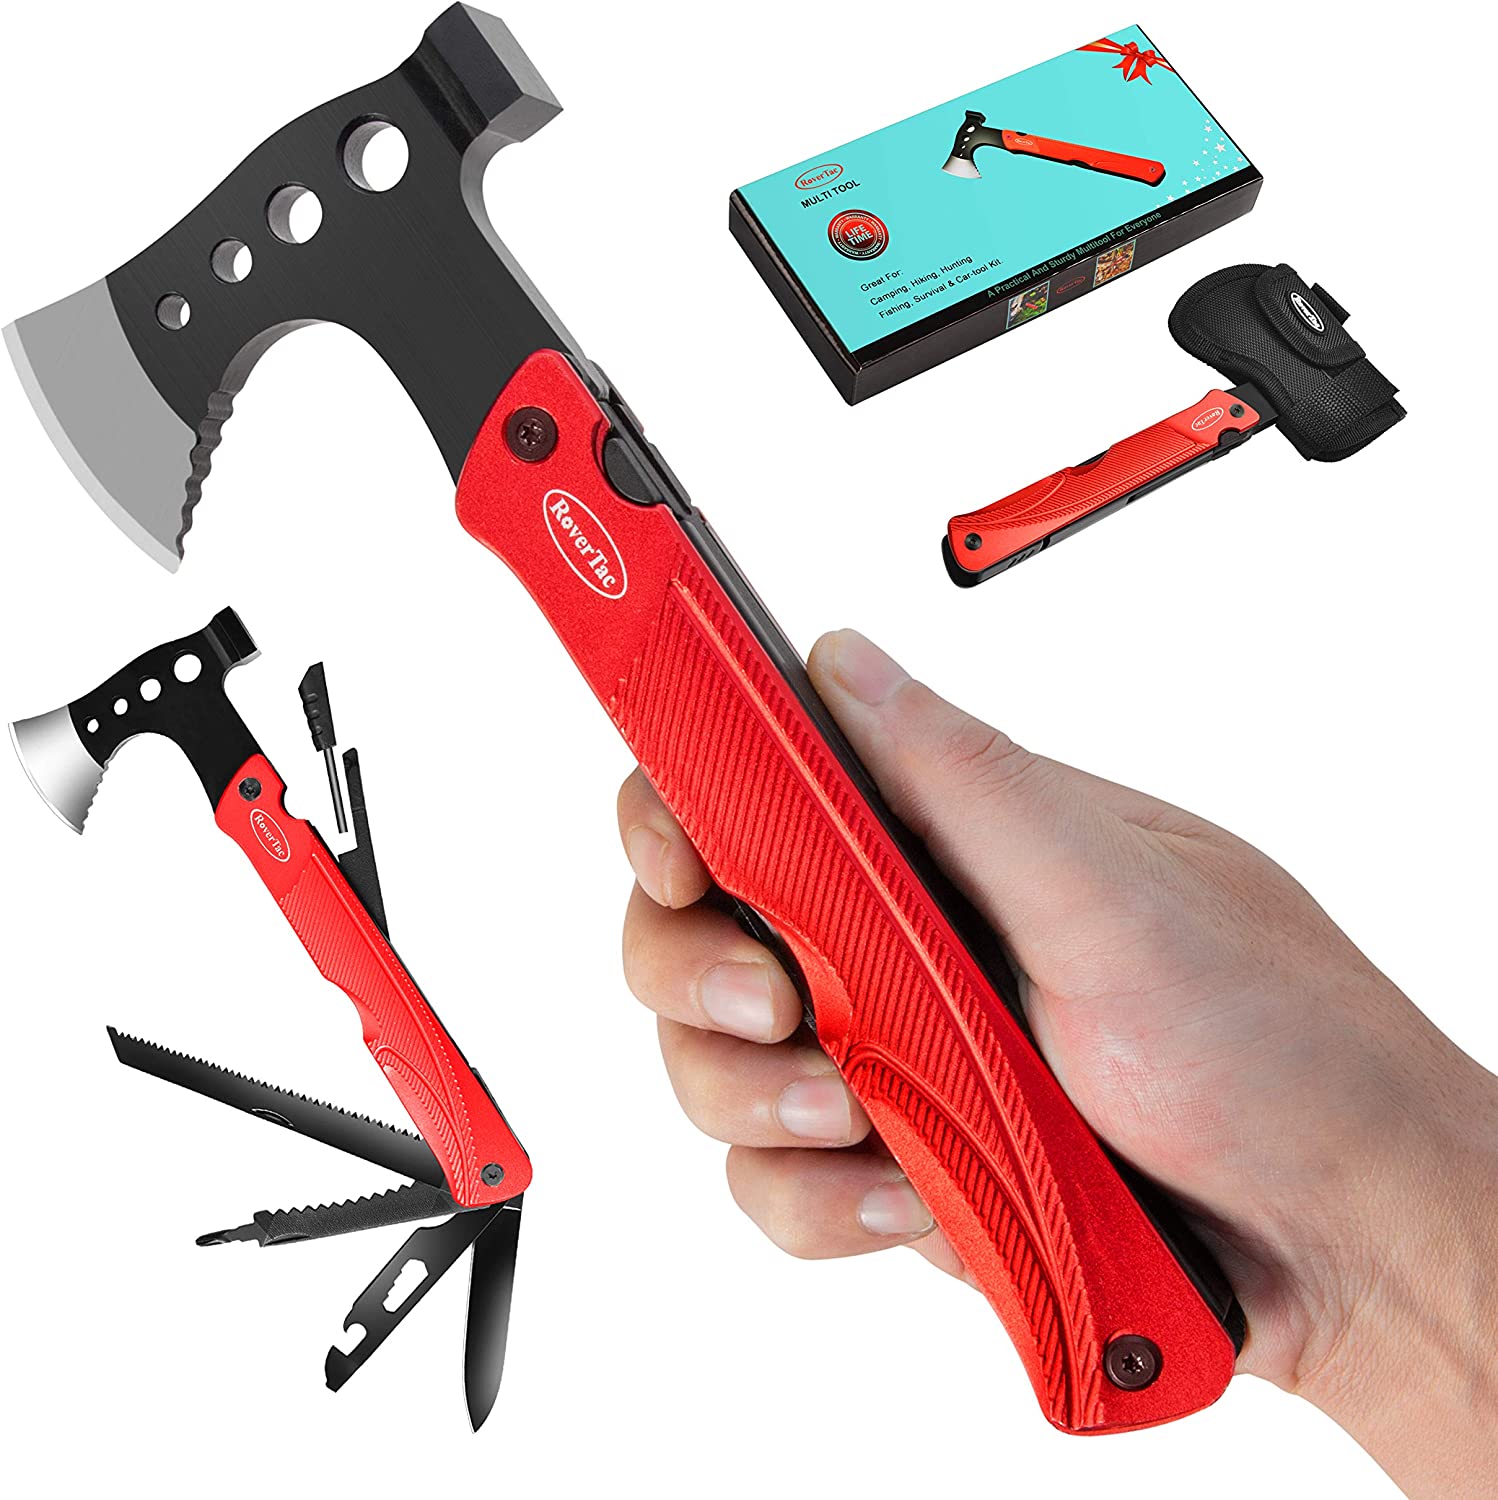 RoverTac Camping Hatchet Multitool Axe Survival Tool Christmas Gifts for Men Dad Him 14 in 1 Axe Hammer Knife Saw Bottle Opener Fire Starter Whistle Perfect for Camping Survival Hiking Fishing